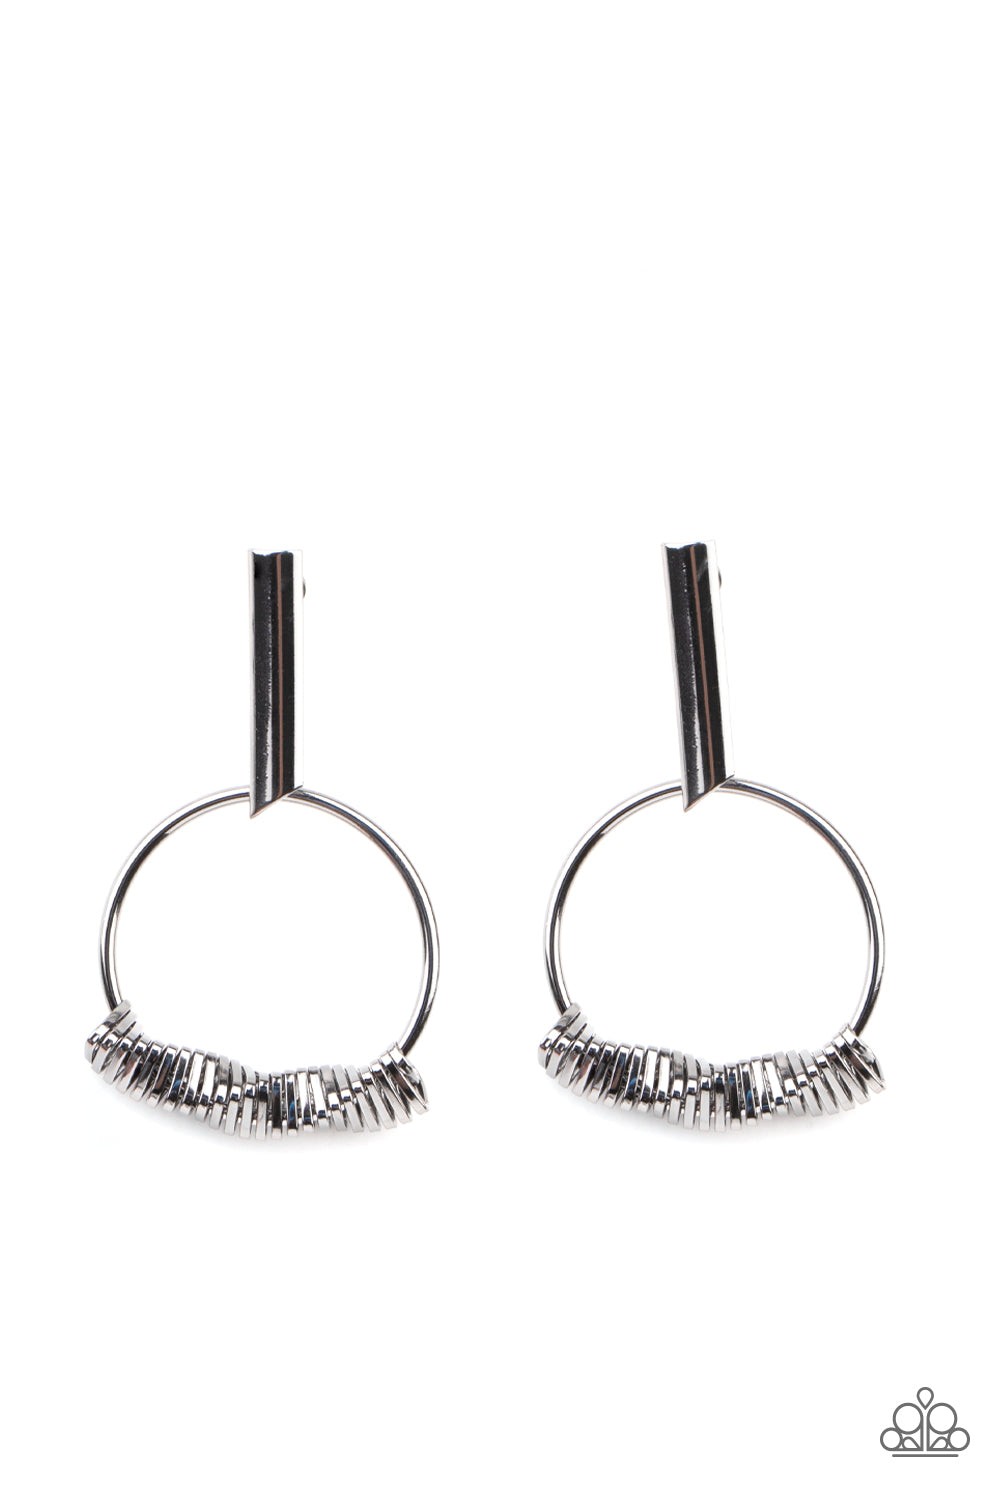 Set Into Motion Black Earring - Paparazzi Accessories  Glistening gunmetal triangular rings are delicately fitted in place along the bottom of a dainty gunmetal hoop, creating the illusion of twisting movement. The edgy hoop links to a gunmetal rectangular hoop, creating an edgy lure. Earring attaches to a standard post fitting.  All Paparazzi Accessories are lead free and nickel free!  Sold as one pair of post earrings.